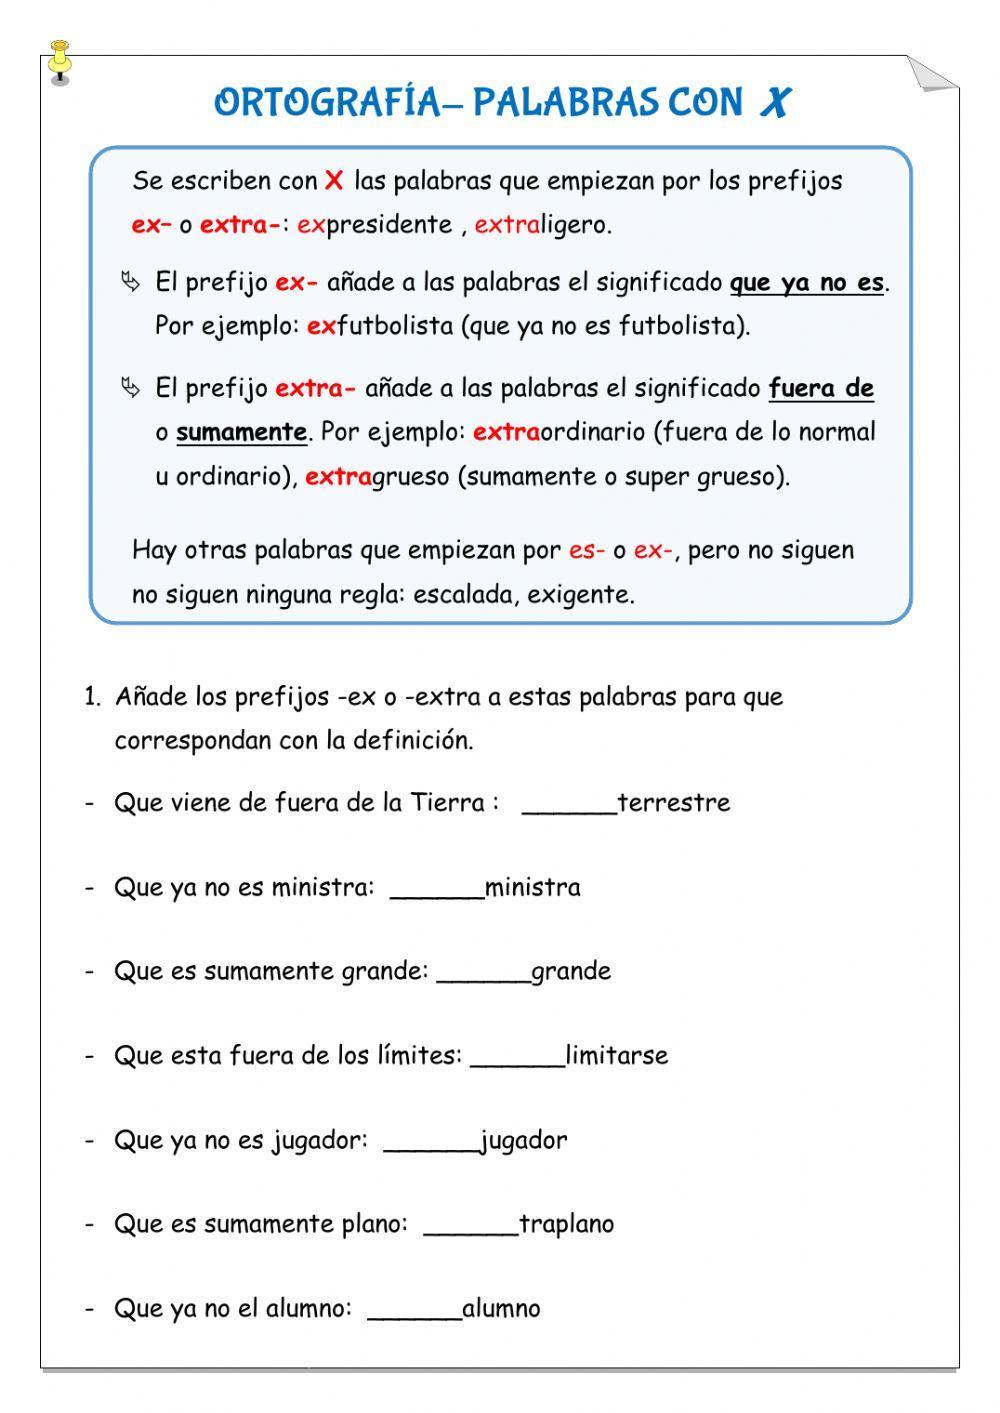 Palabras con x interactive worksheet | Live Worksheets